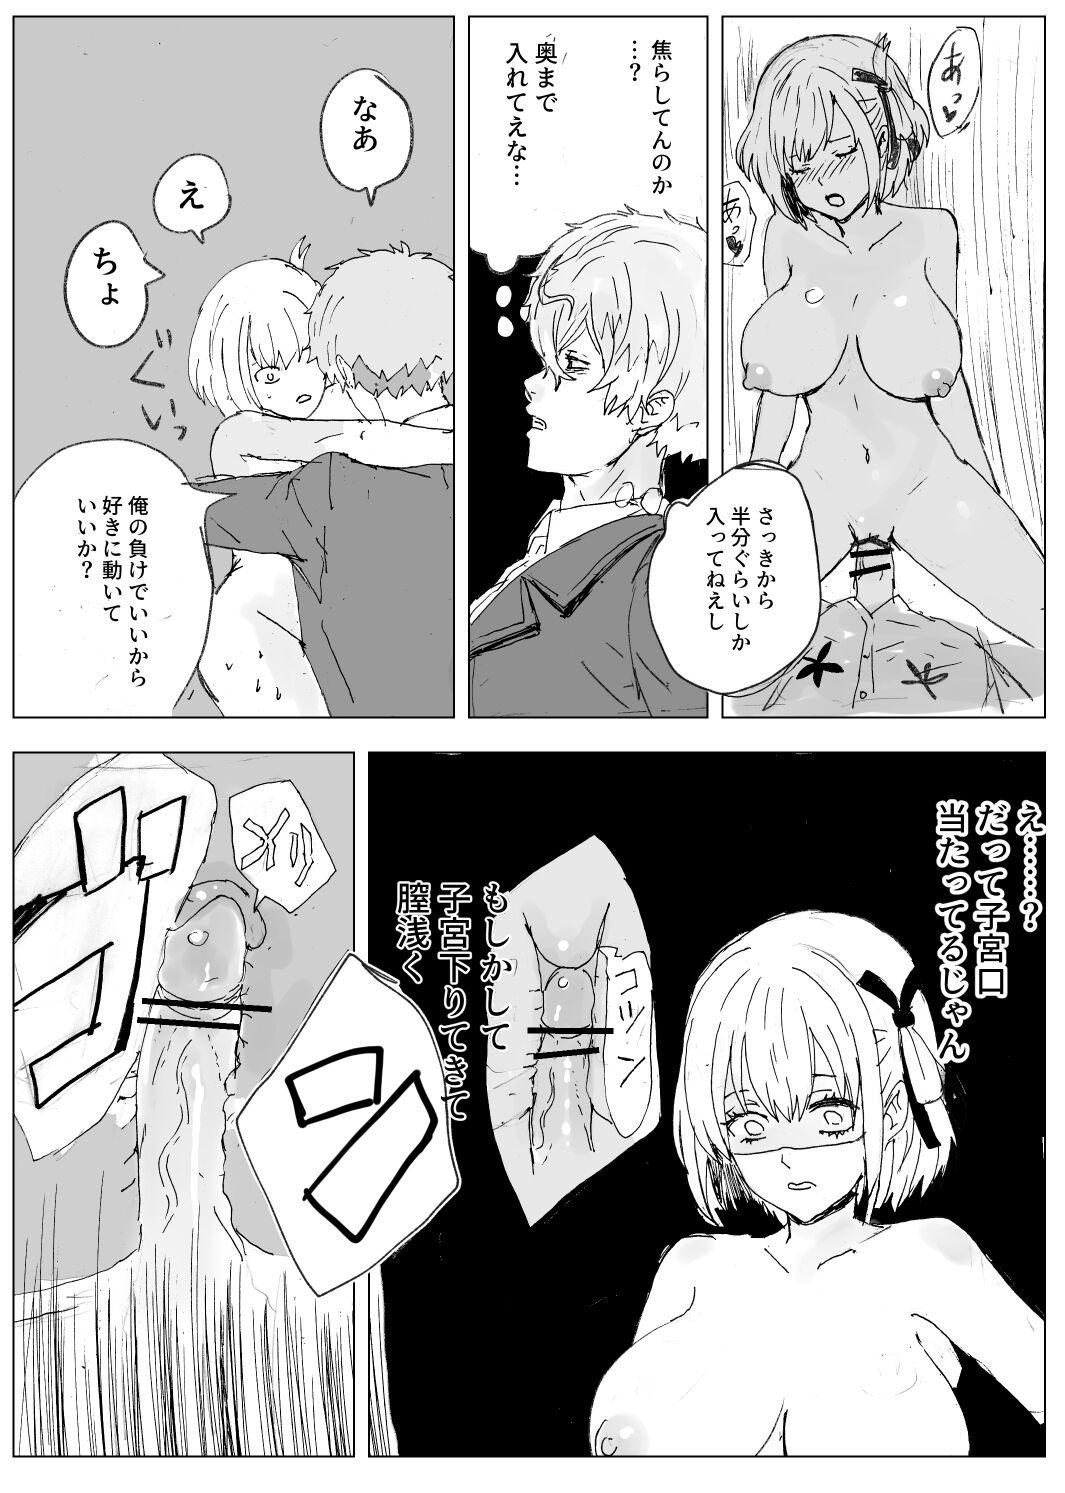 Role Play Magichisa Sex Battle Edition - Lycoris recoil Awesome - Page 4